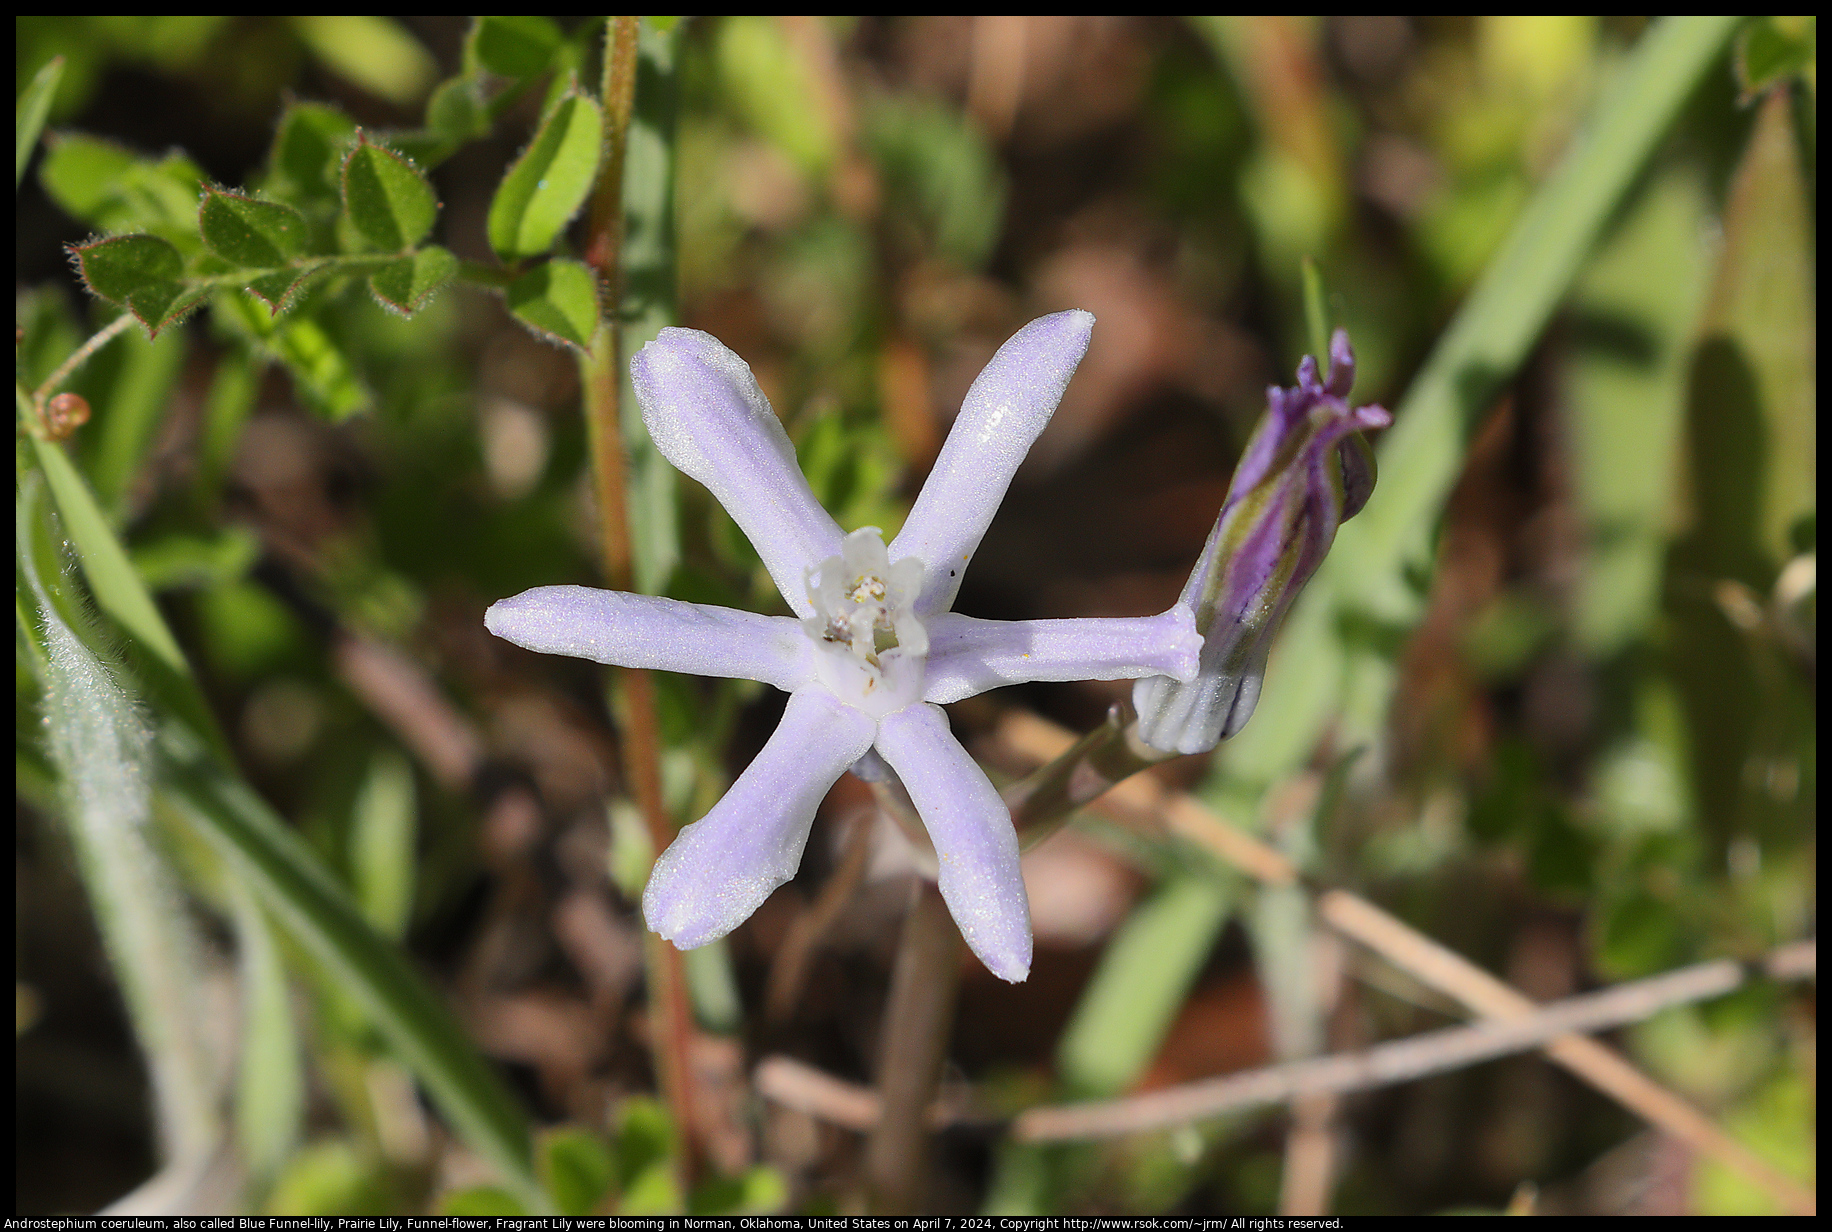 Androstephium coeruleum, also called Blue Funnel-lily, Prairie Lily, Funnel-flower, Fragrant Lily were blooming in Norman, Oklahoma, United States on April 7, 2024